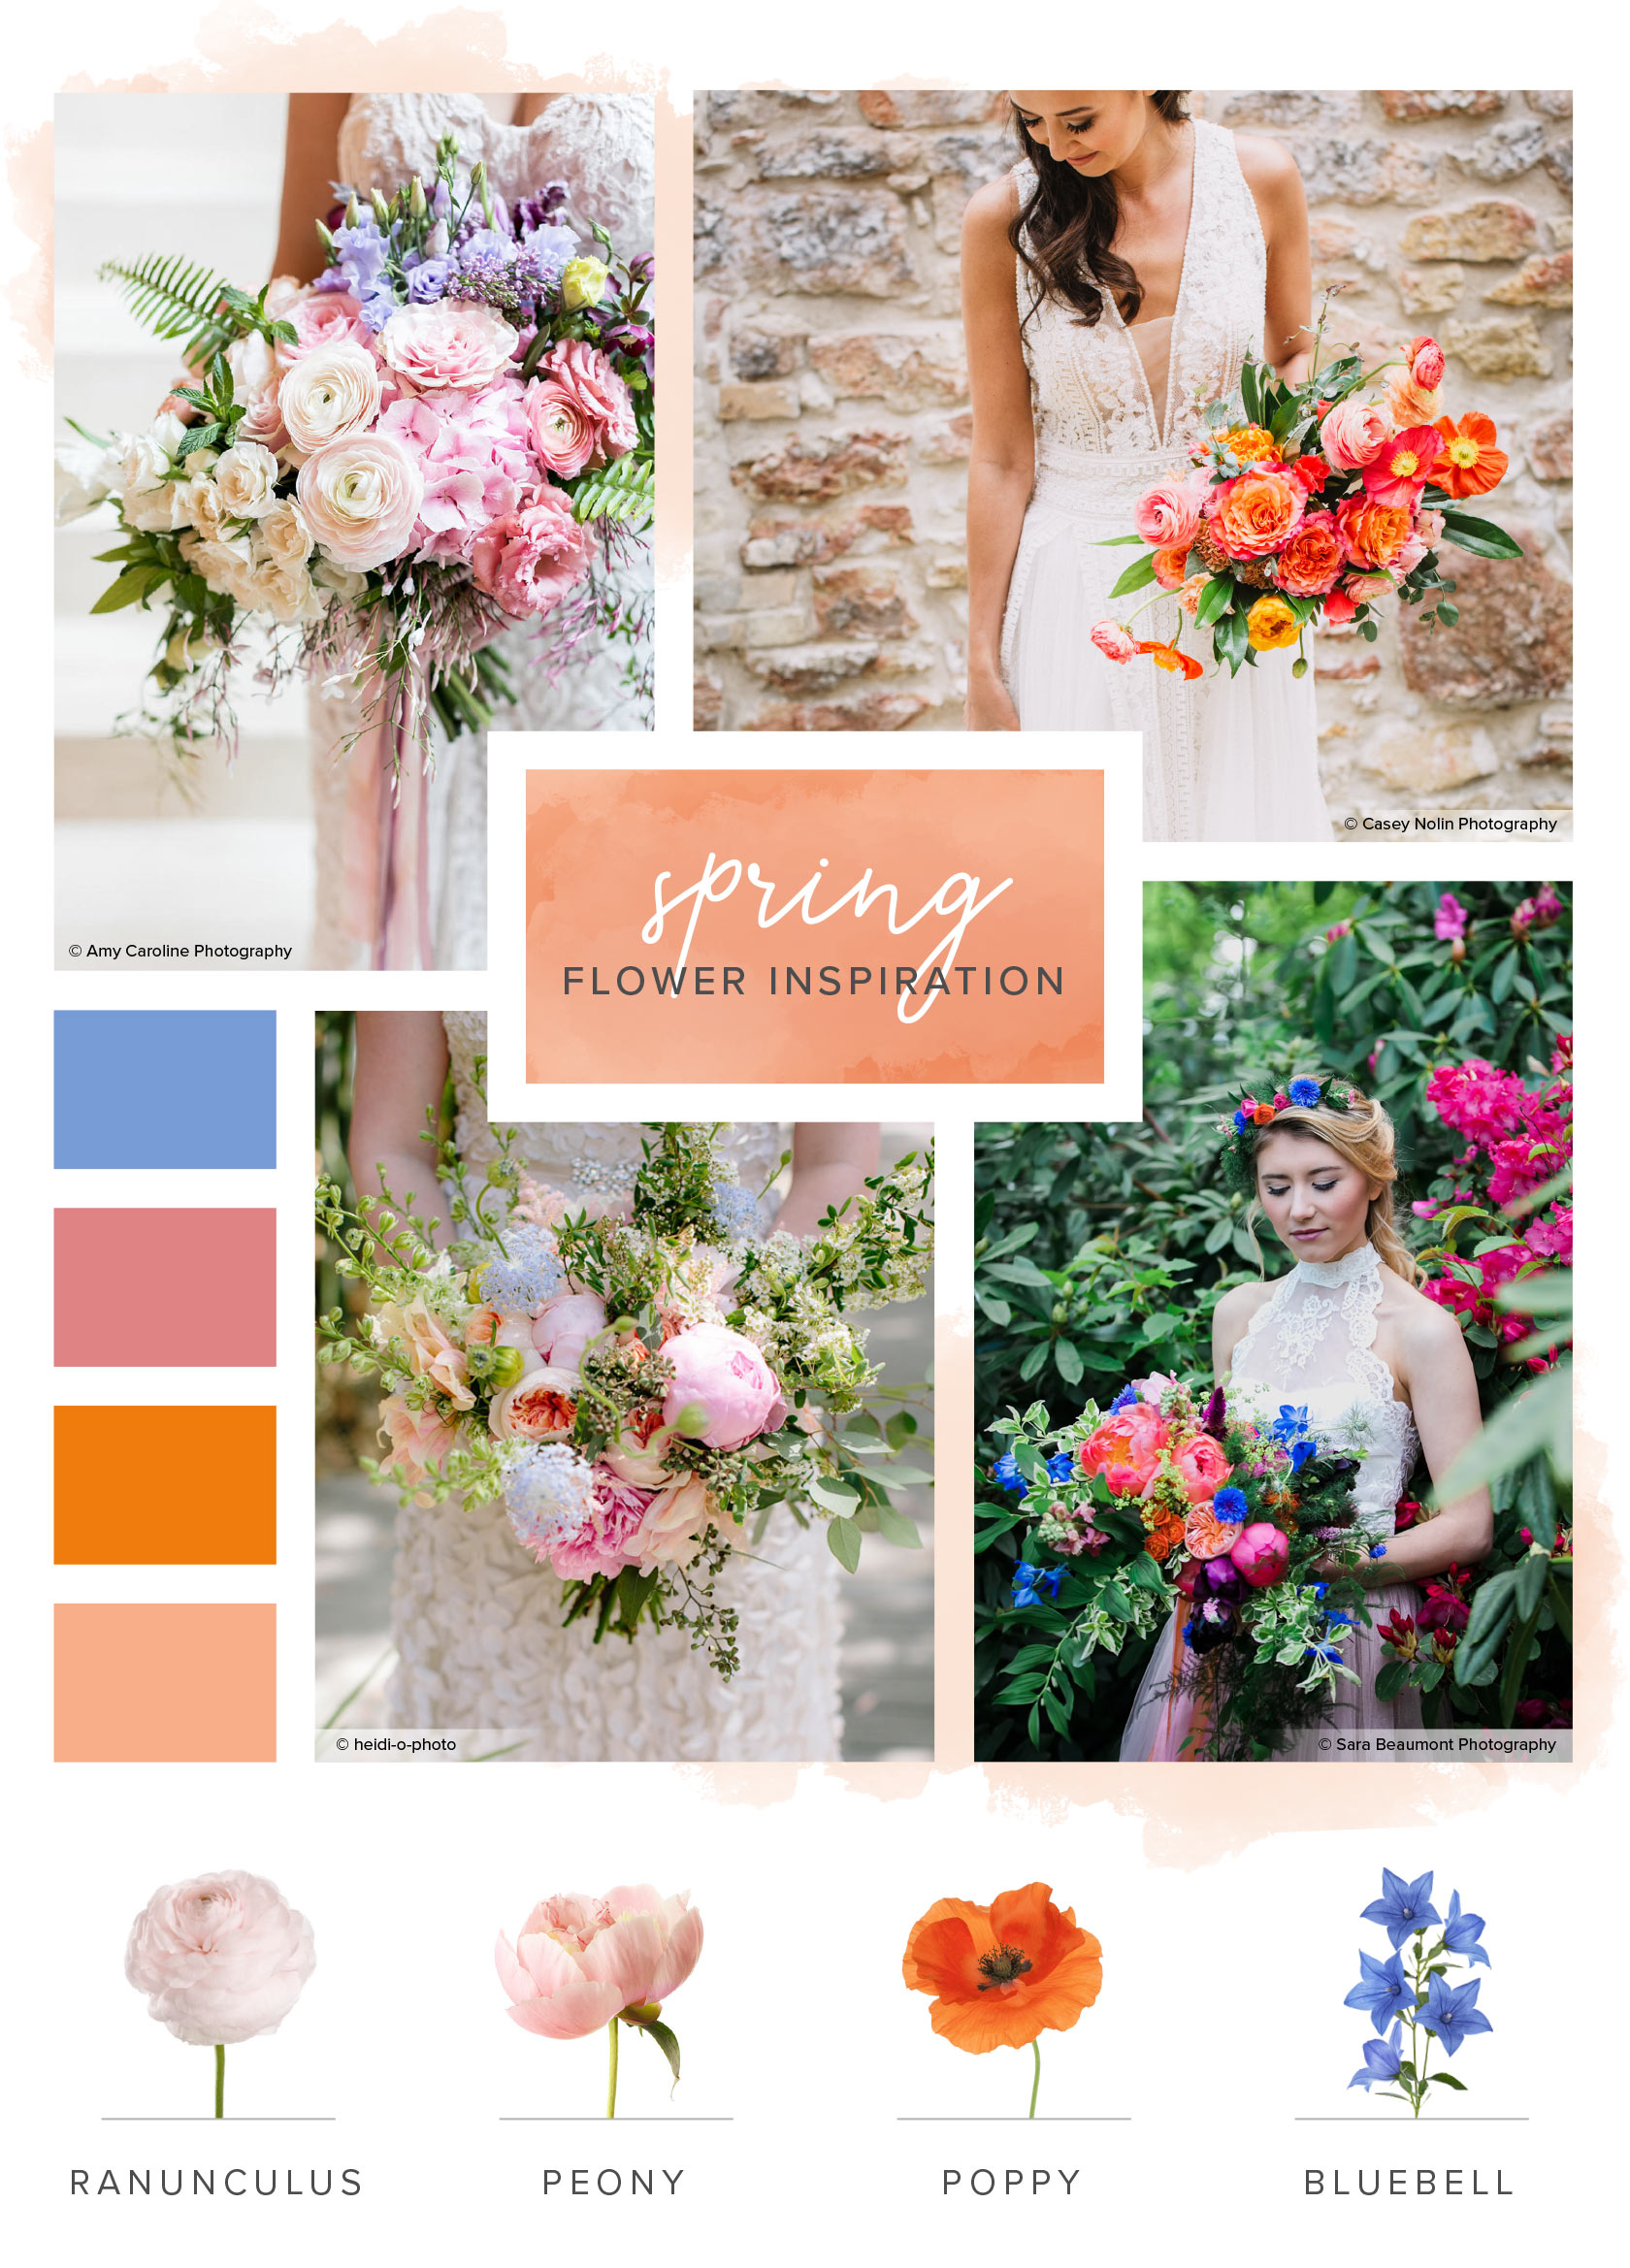 A Seasonal Guide to Minimize Your Wedding Flower Costs. Spring Flowers Bridal Bouquet and Color Scheme Inspiration. // mysweetengagement.com